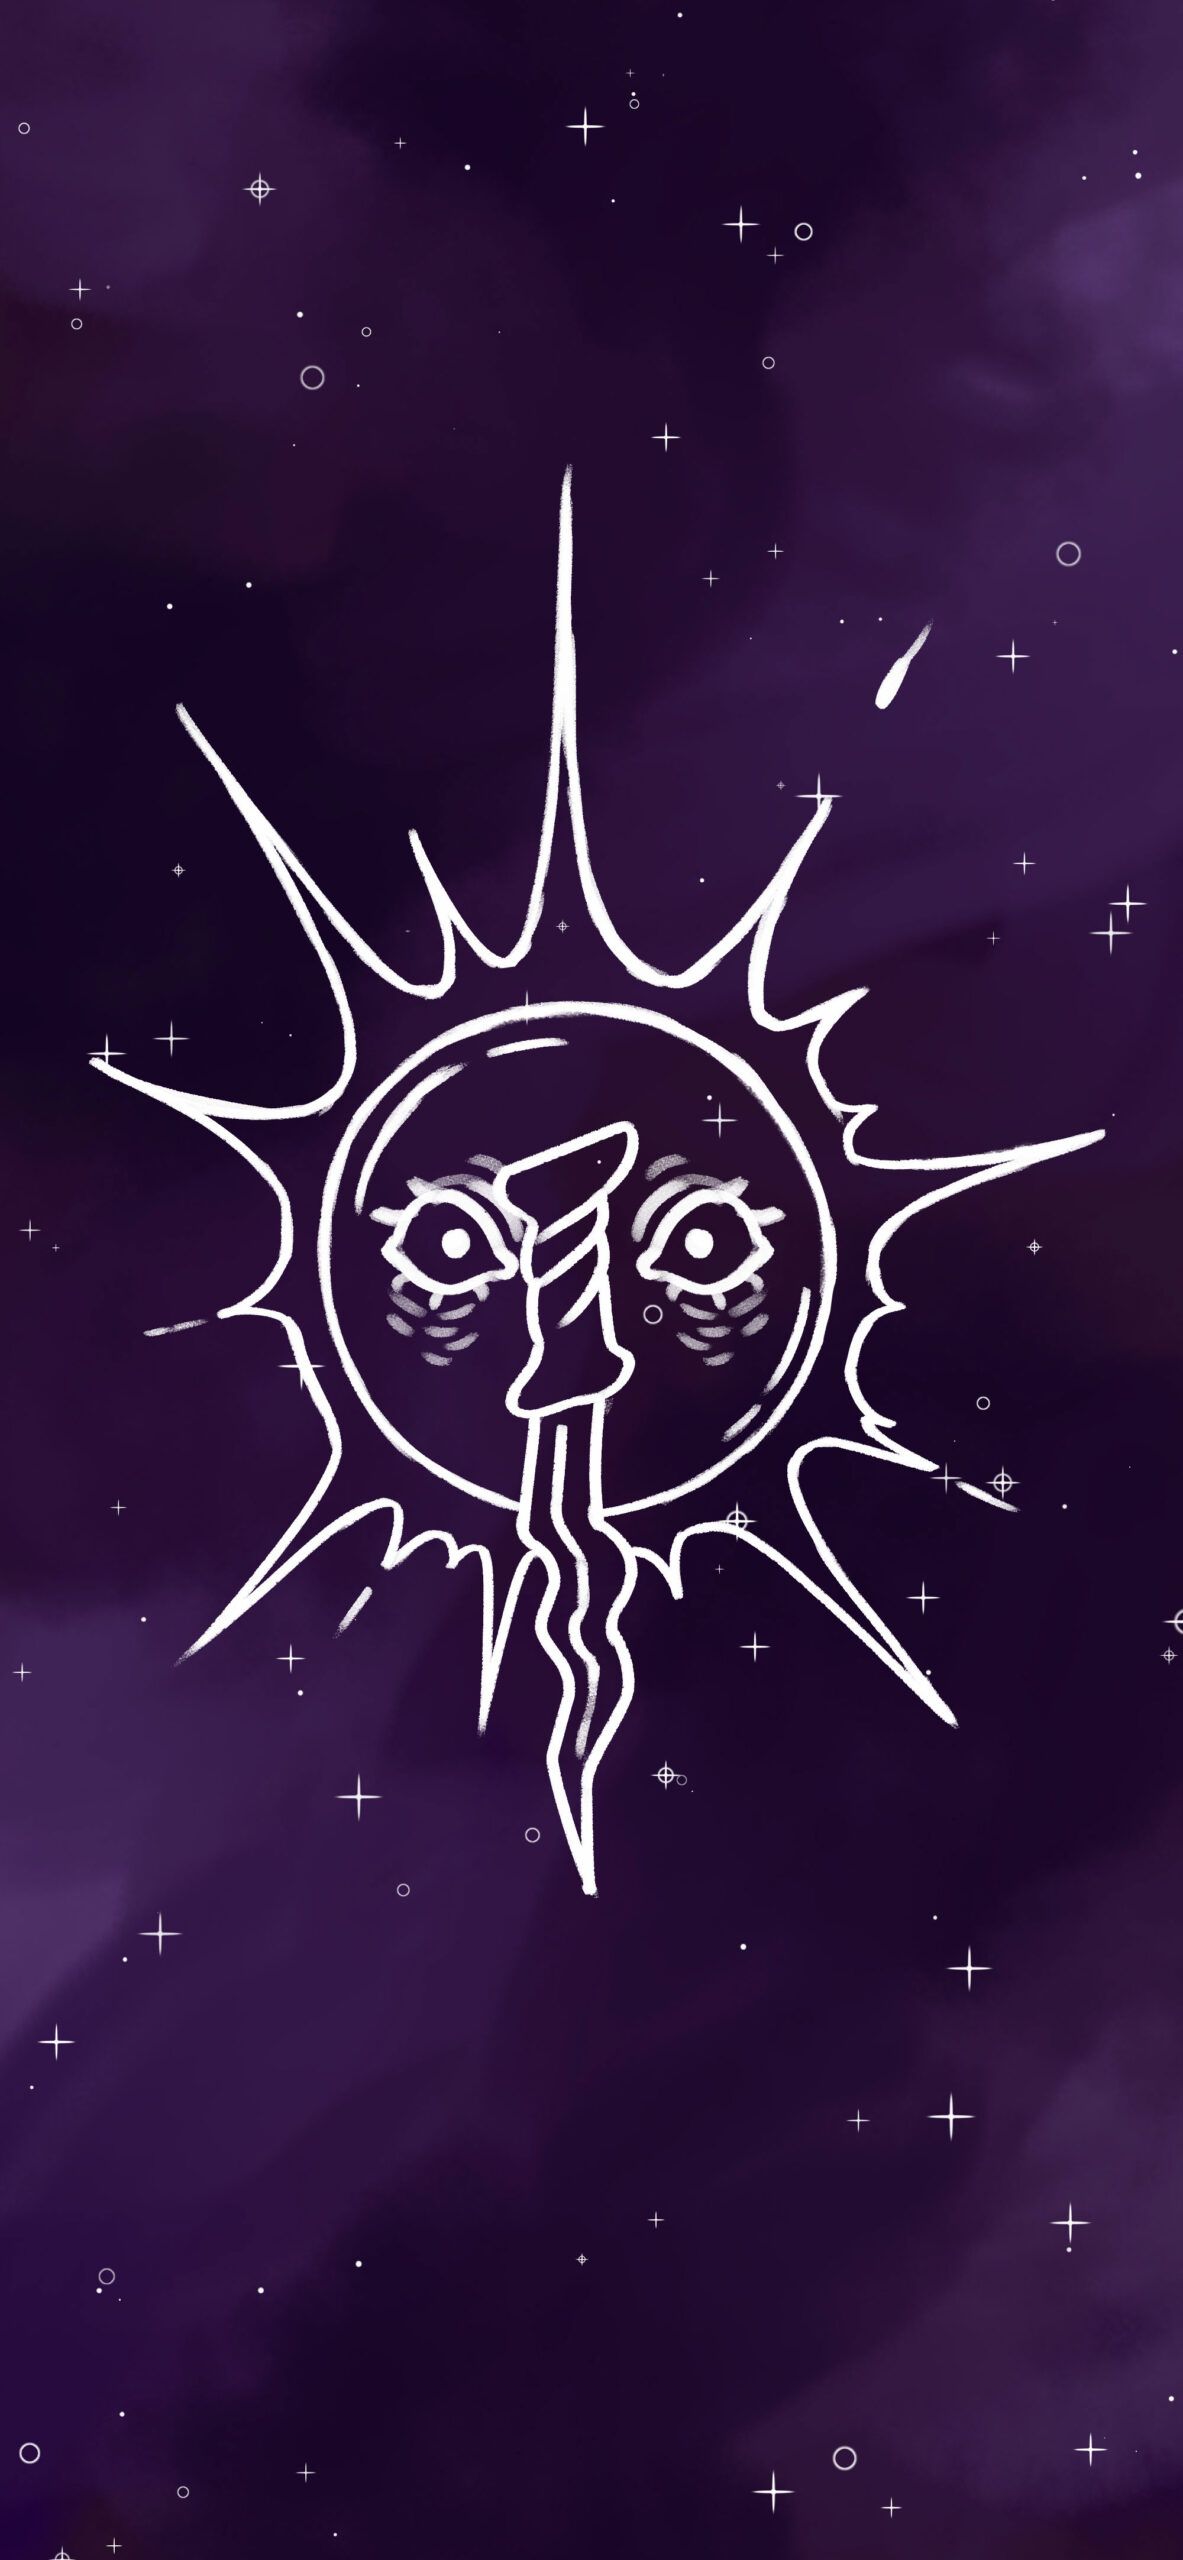 A purple background with the sun symbol on it - Witch